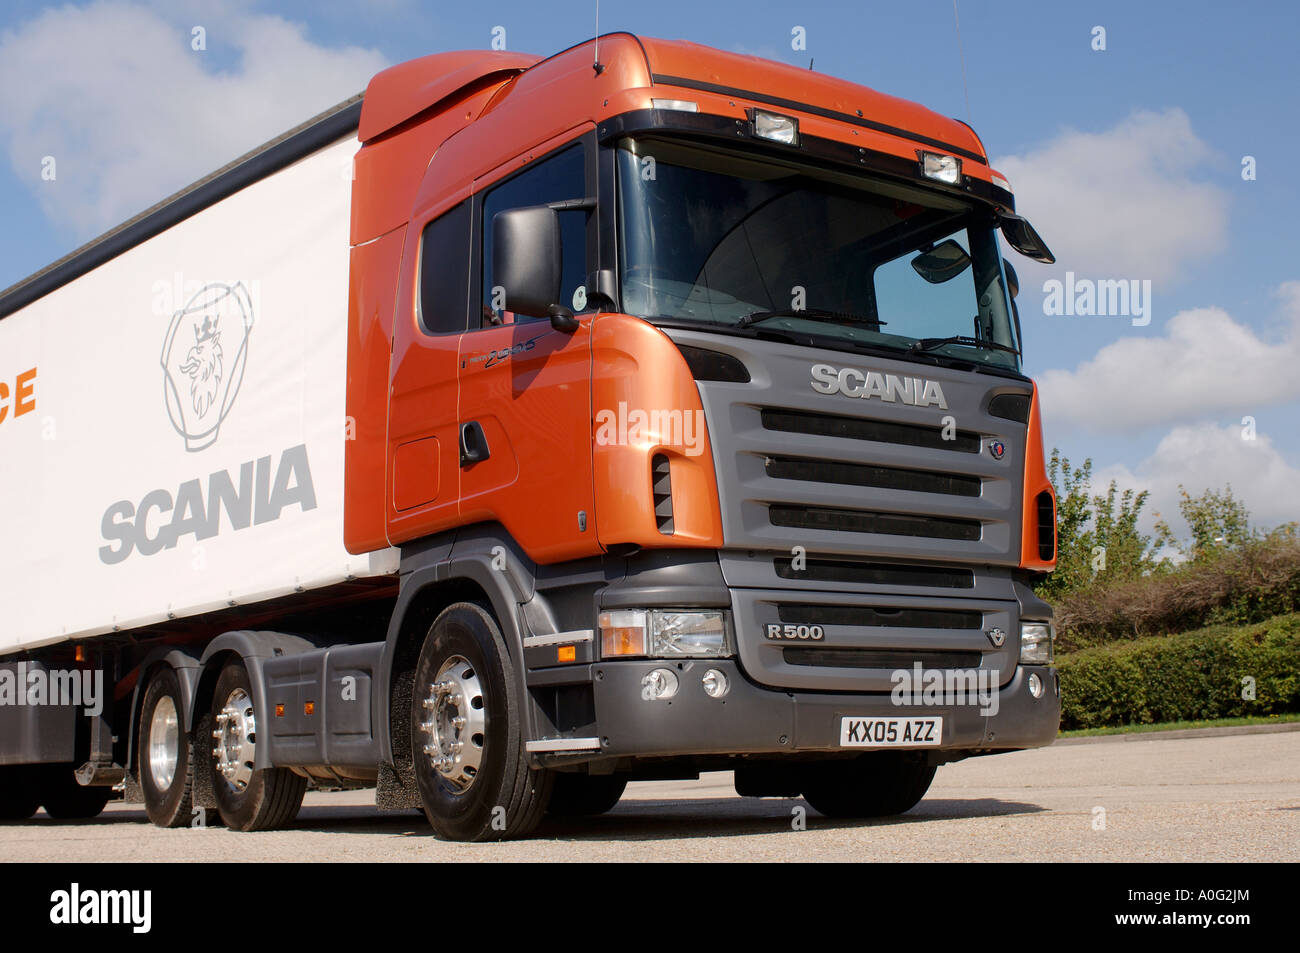 scania r500 v8 articulated lorry at a distribution centre in the uk Stock Photo